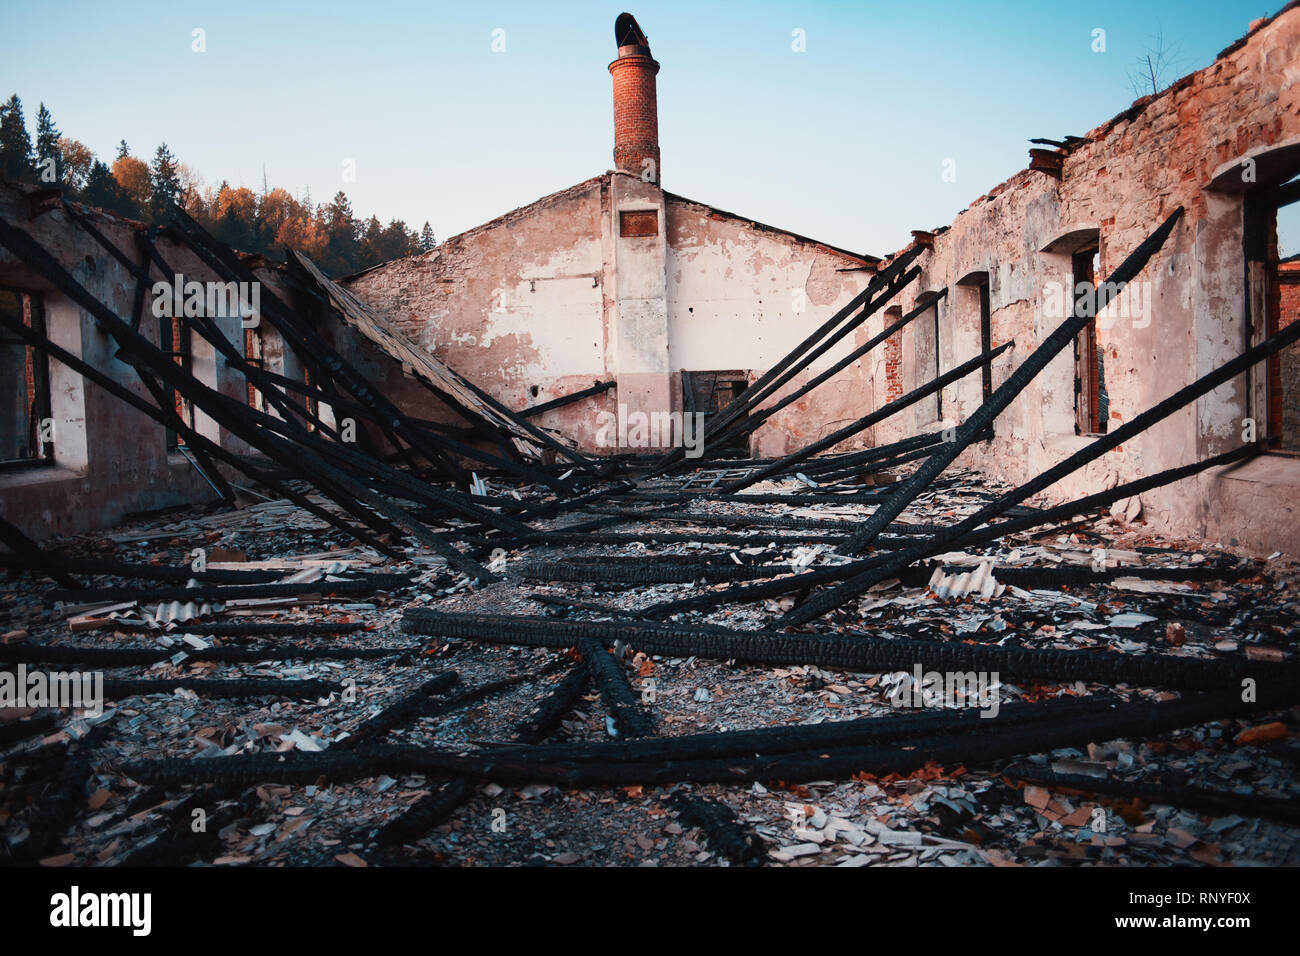 Burnt wooden house. House after the fire. Burned brick house with burnt roof inside view Stock Photo